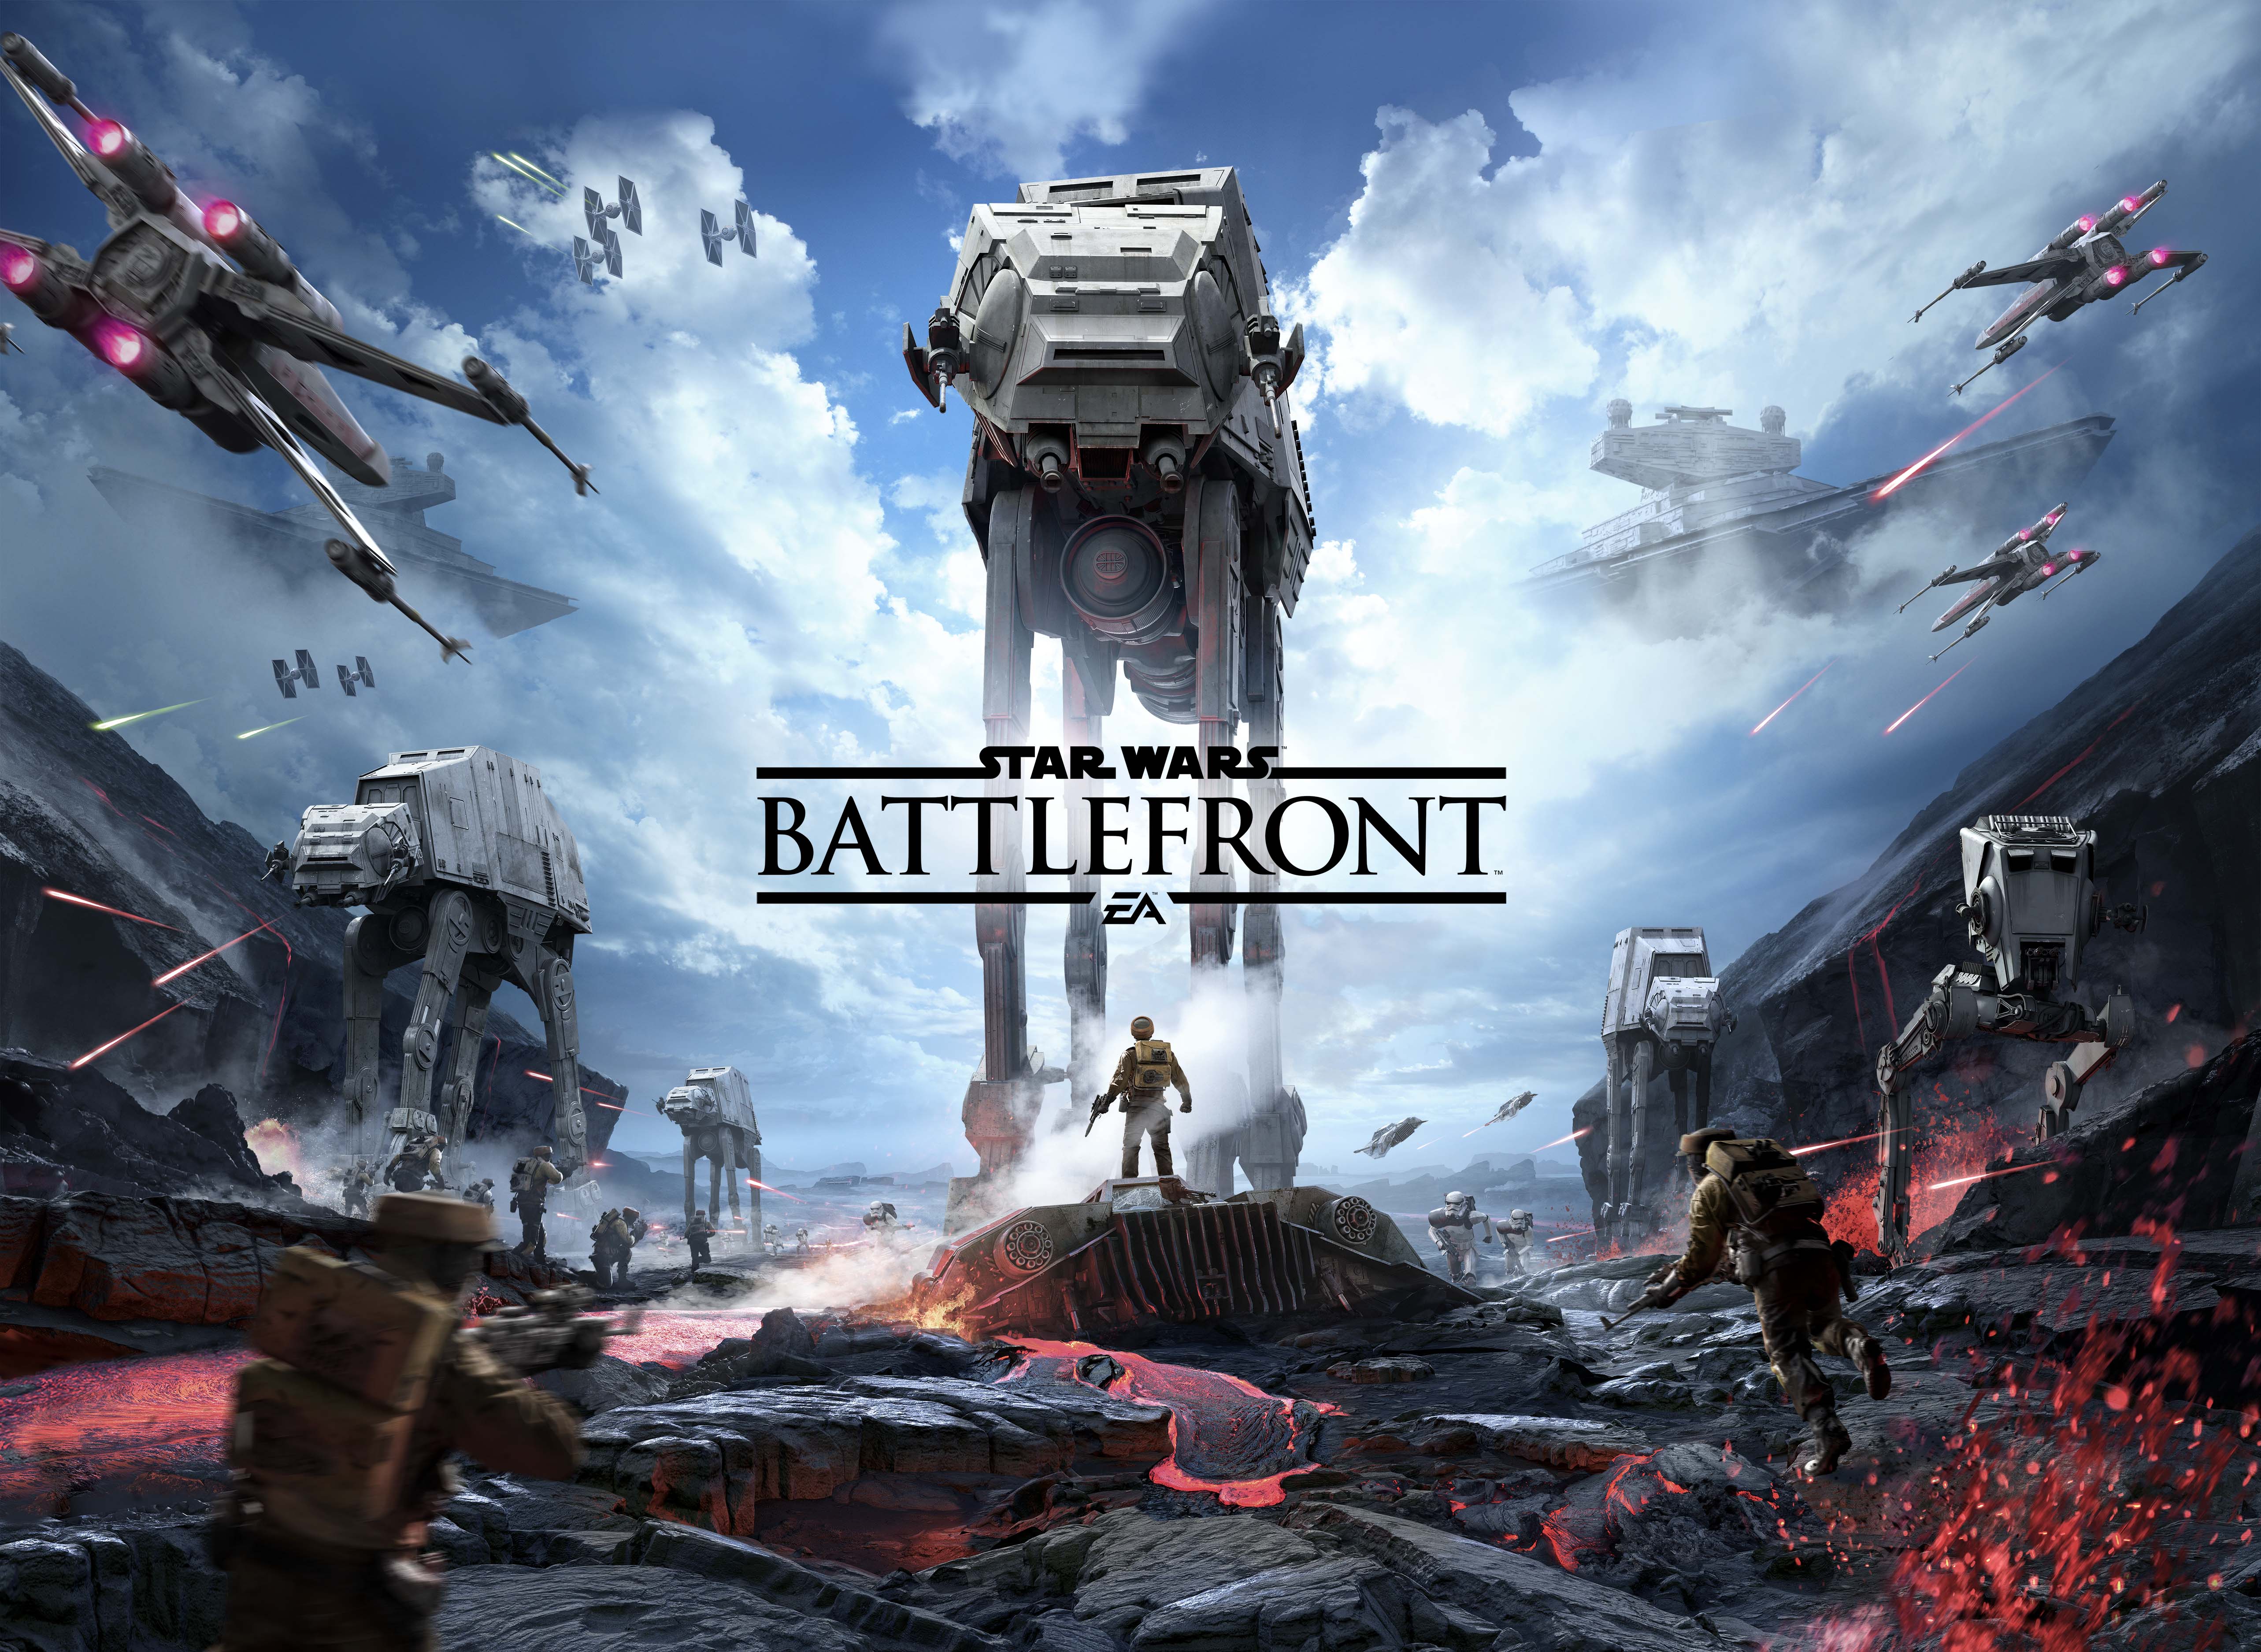 Star Wars Battlefront Trailer and Release Date Reaction